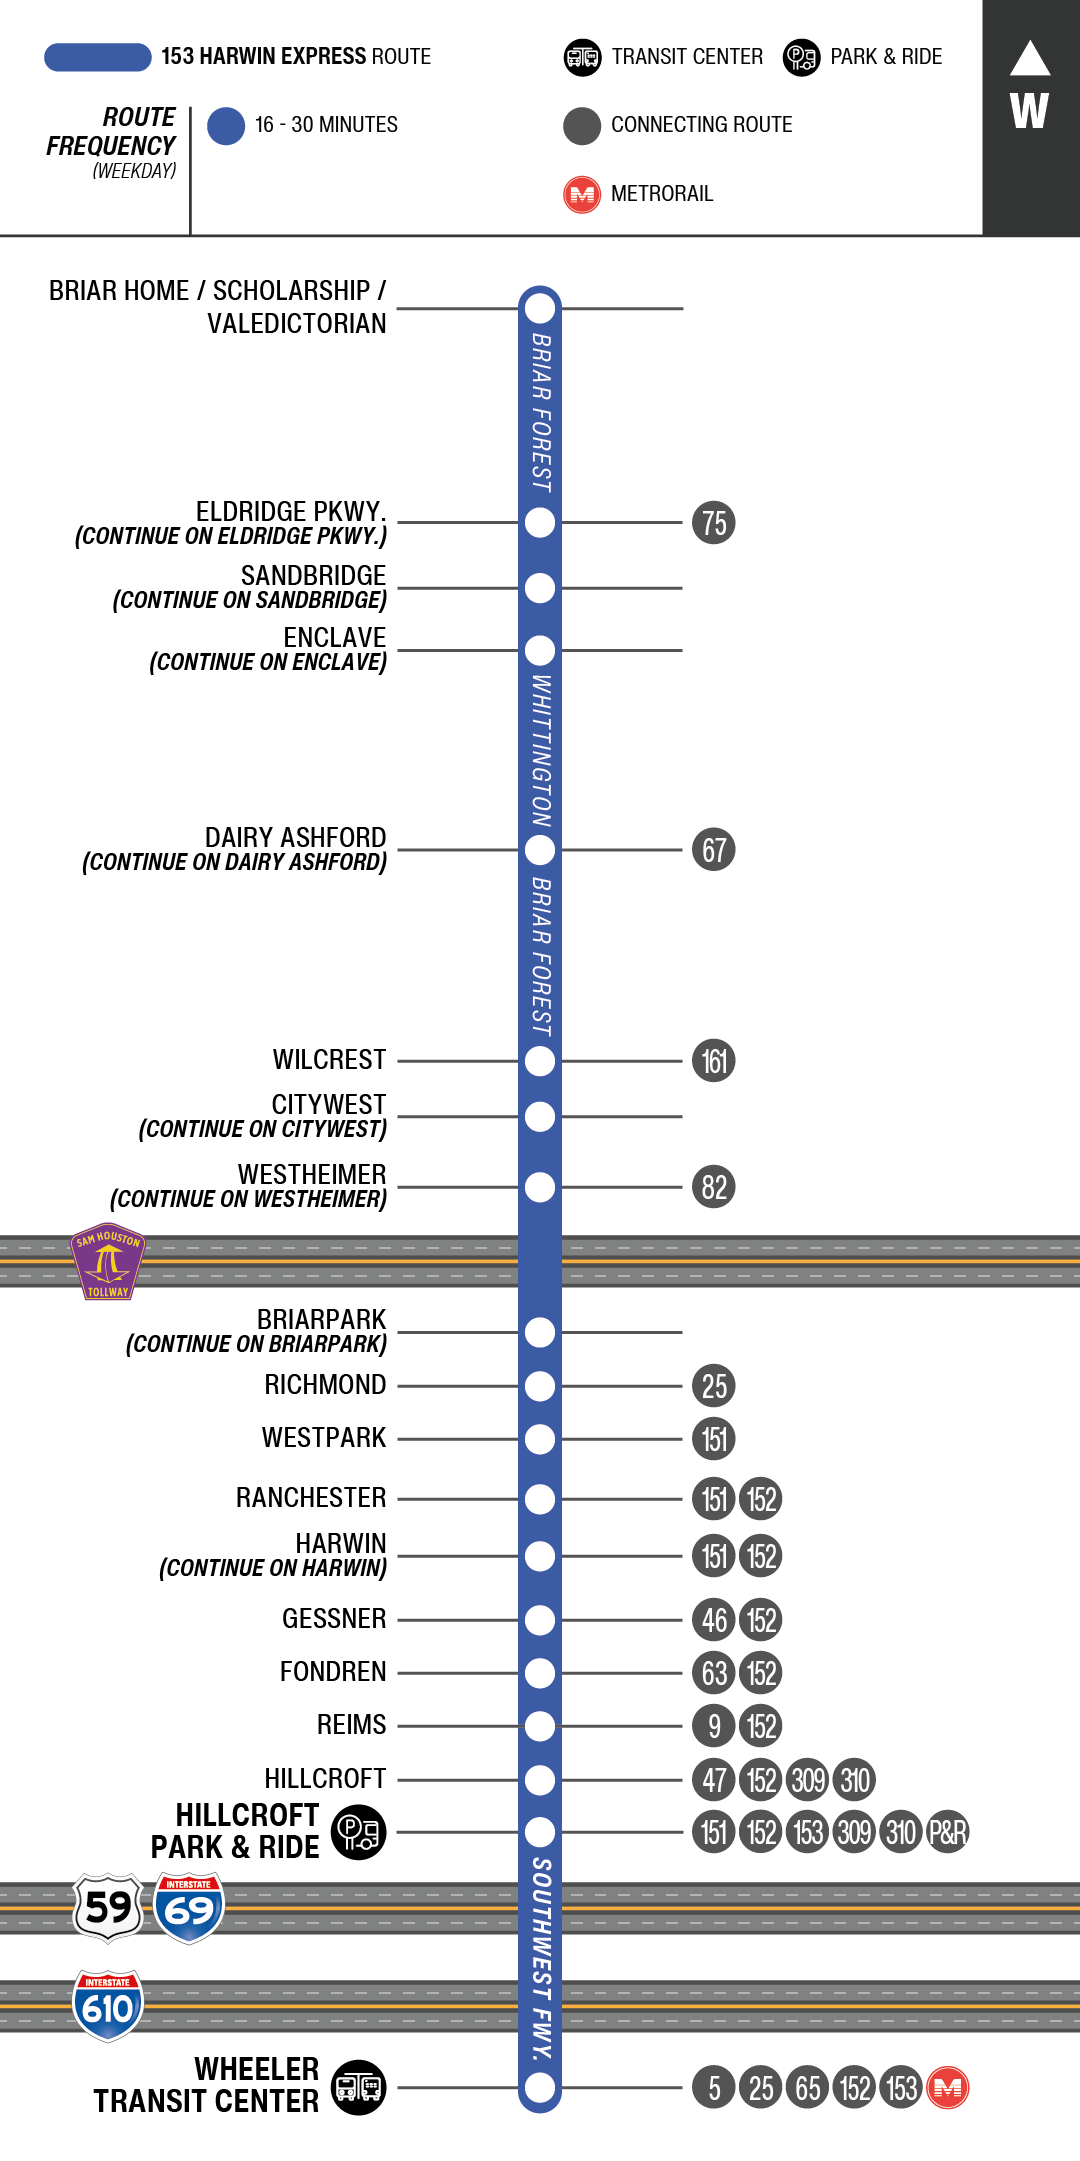 Route map for 153 Harwin Express bus